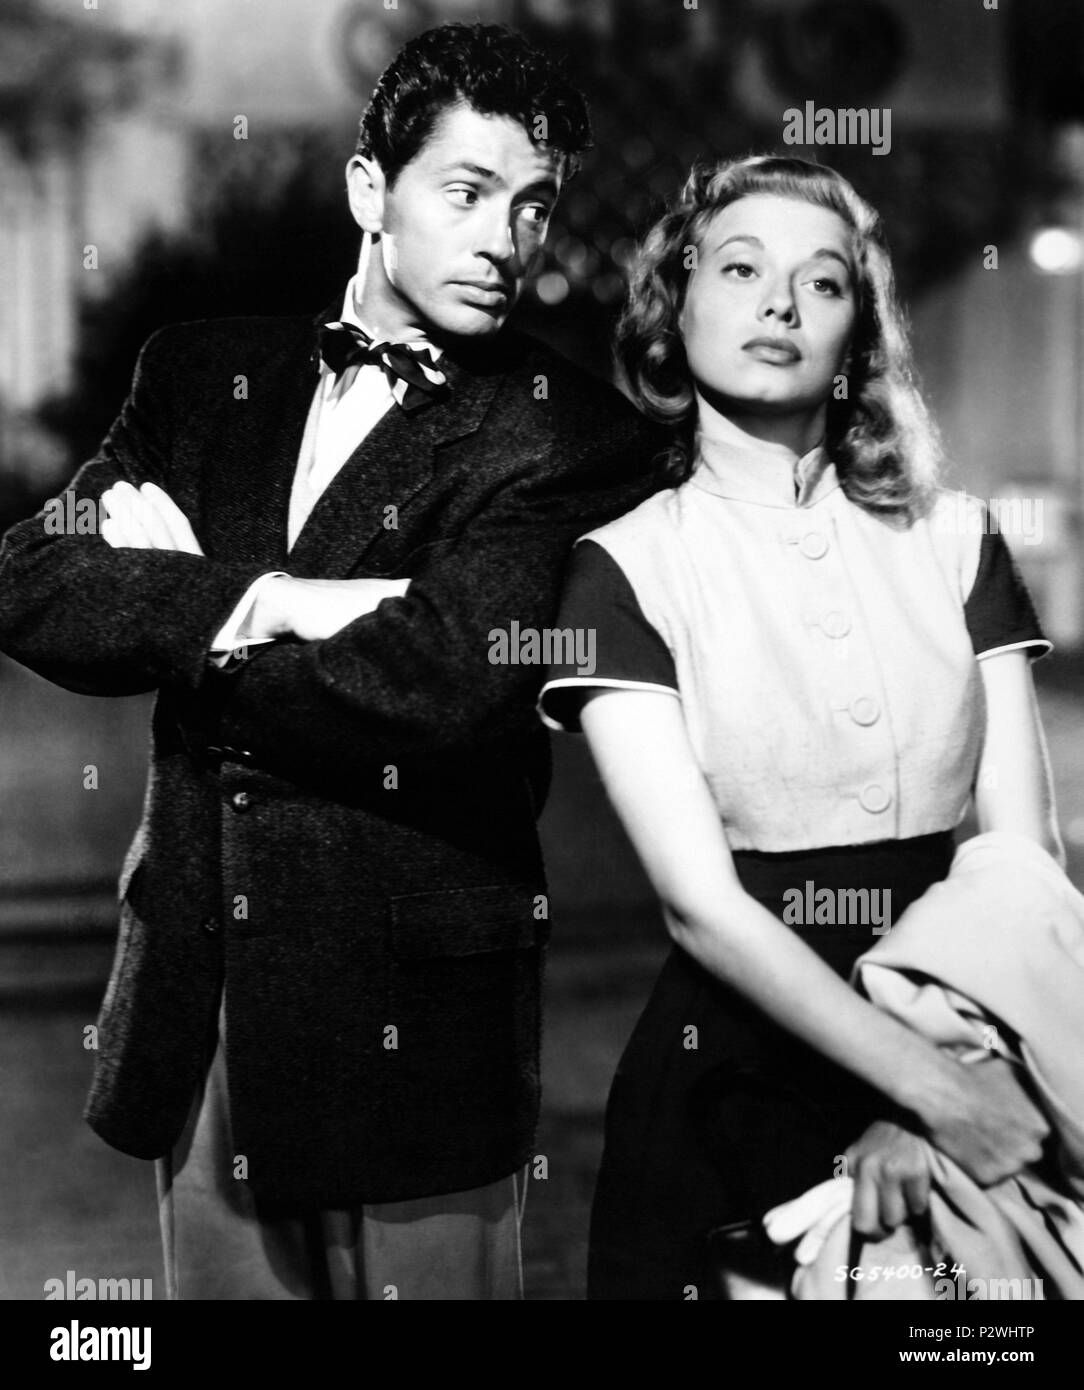 Original Film Title: I WANT YOU.  English Title: I WANT YOU.  Film Director: MARK ROBSON.  Year: 1951.  Stars: FARLEY GRANGER; PEGGY DOW. Credit: RKO RADIO PICTURES / Album Stock Photo